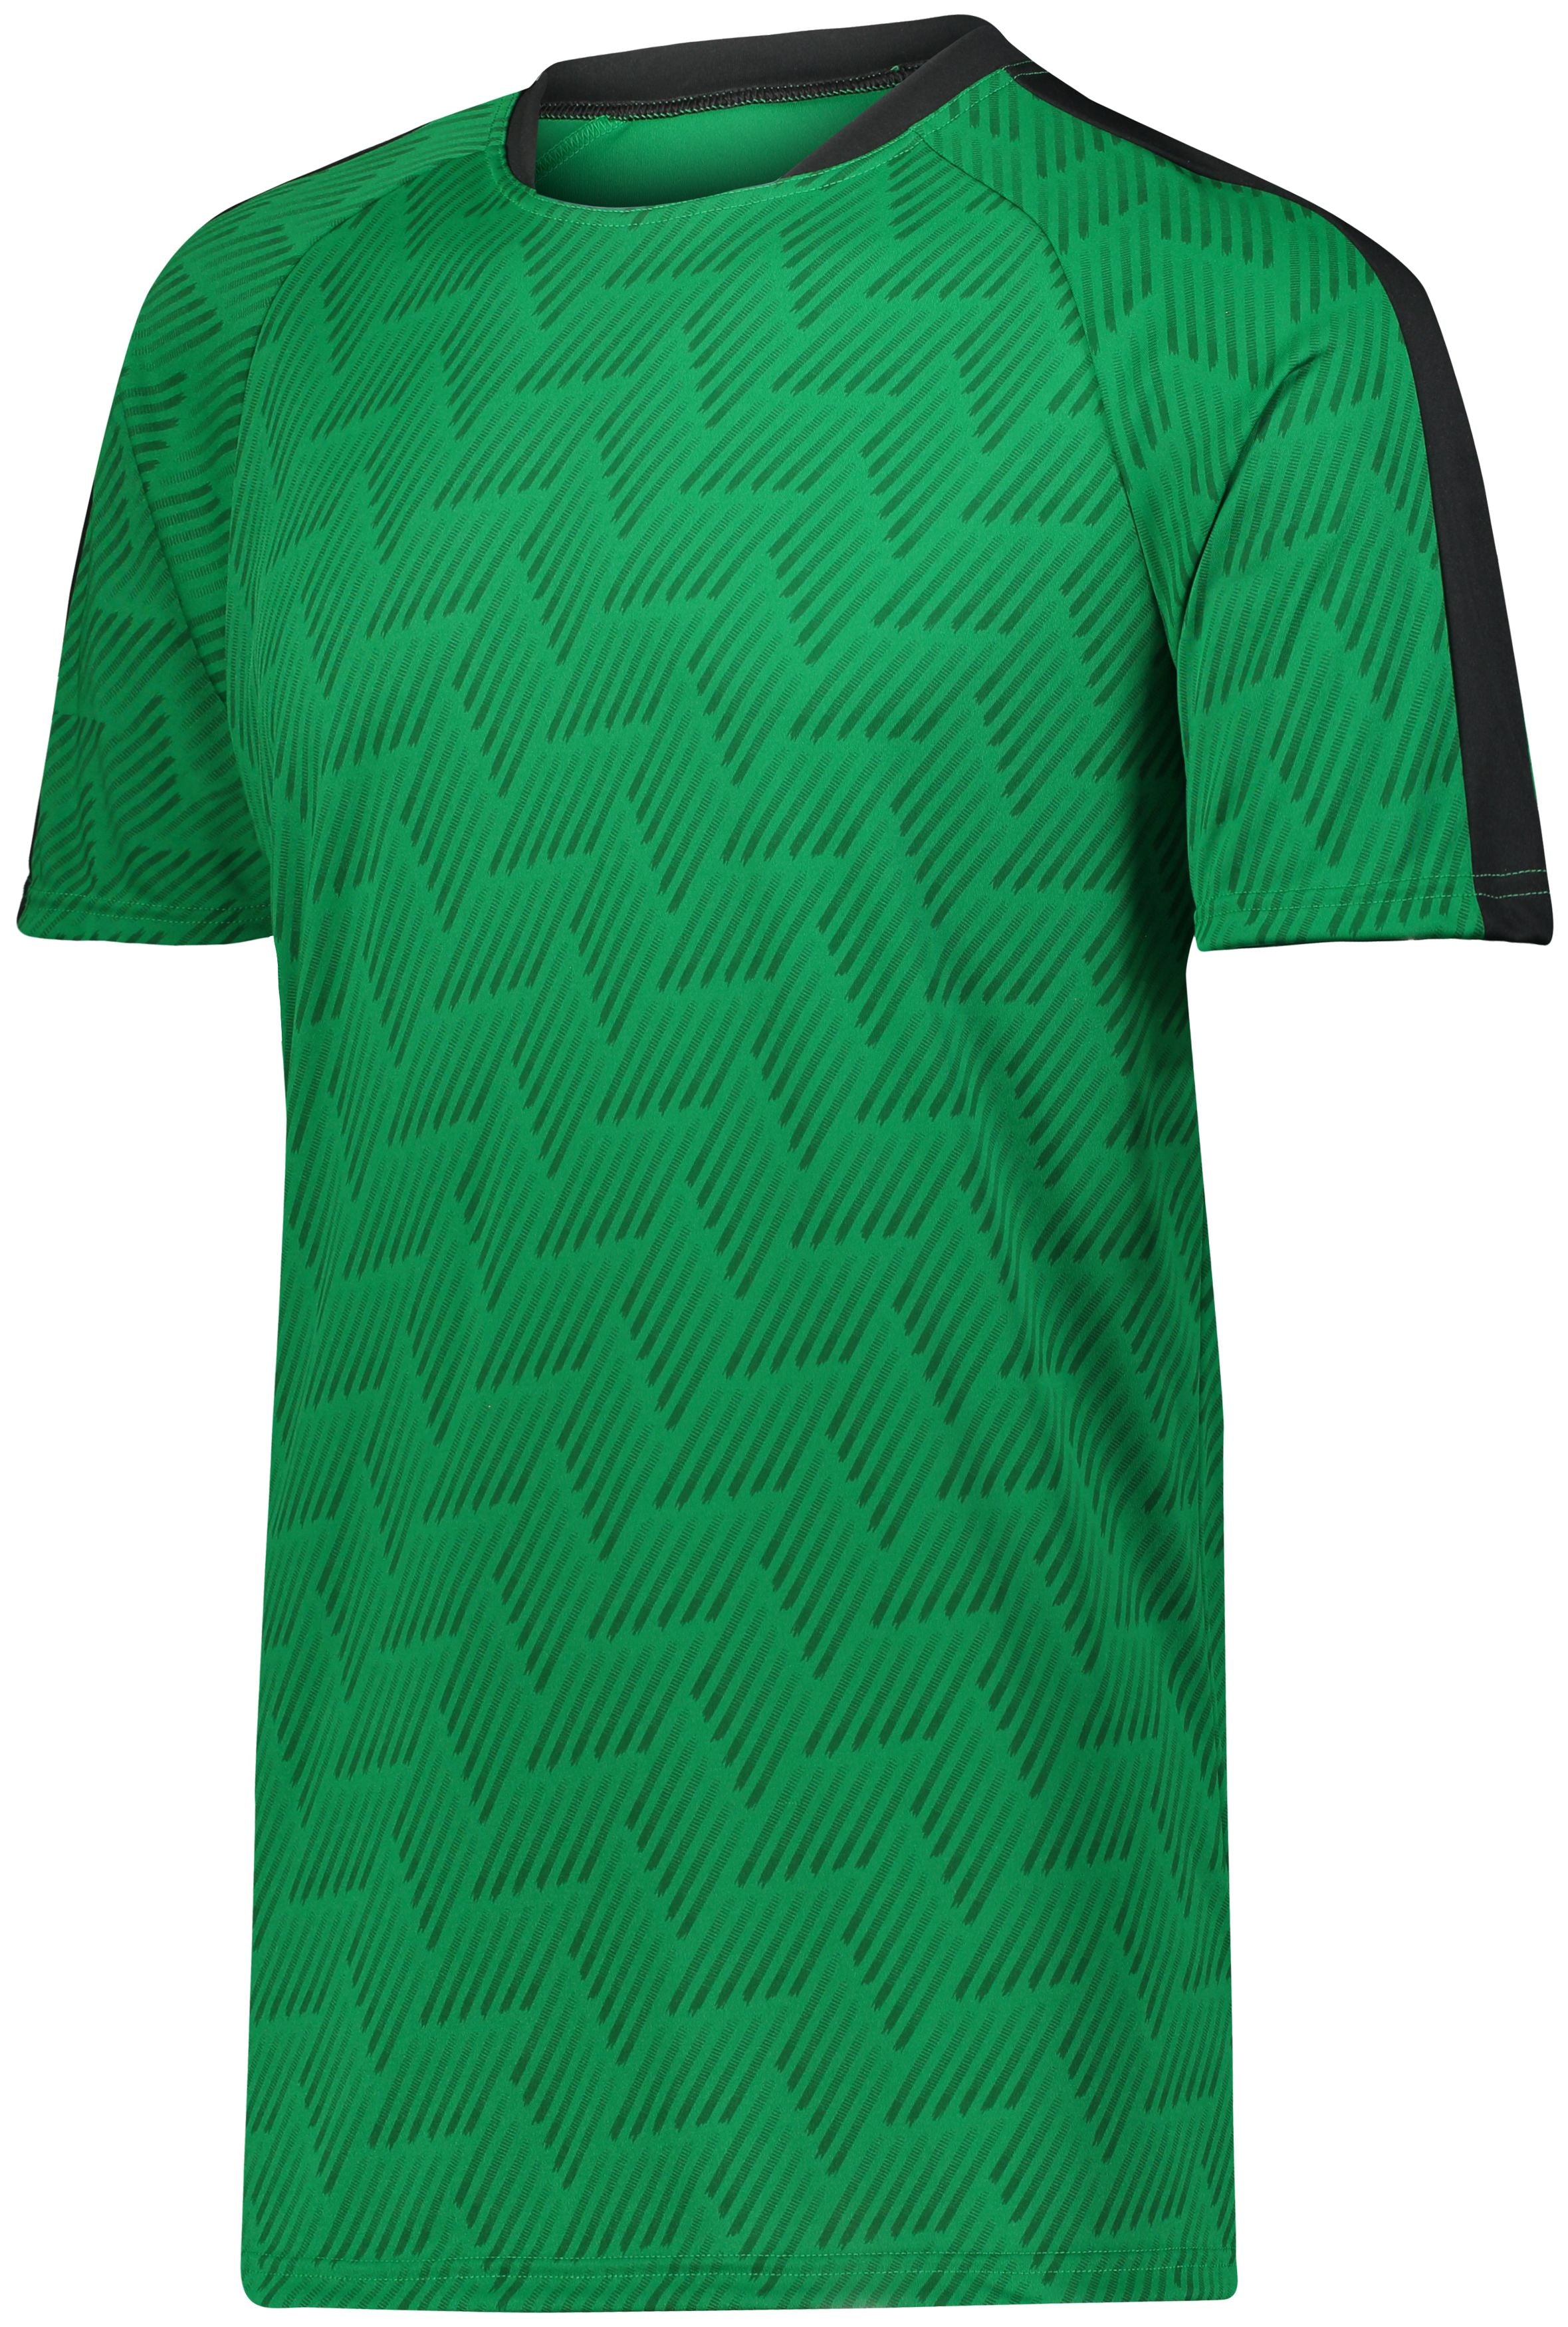 High 5 Hypervolt Jersey in Kelly Print/Black  -Part of the Adult, Adult-Jersey, High5-Products, Soccer, Shirts, All-Sports-1 product lines at KanaleyCreations.com